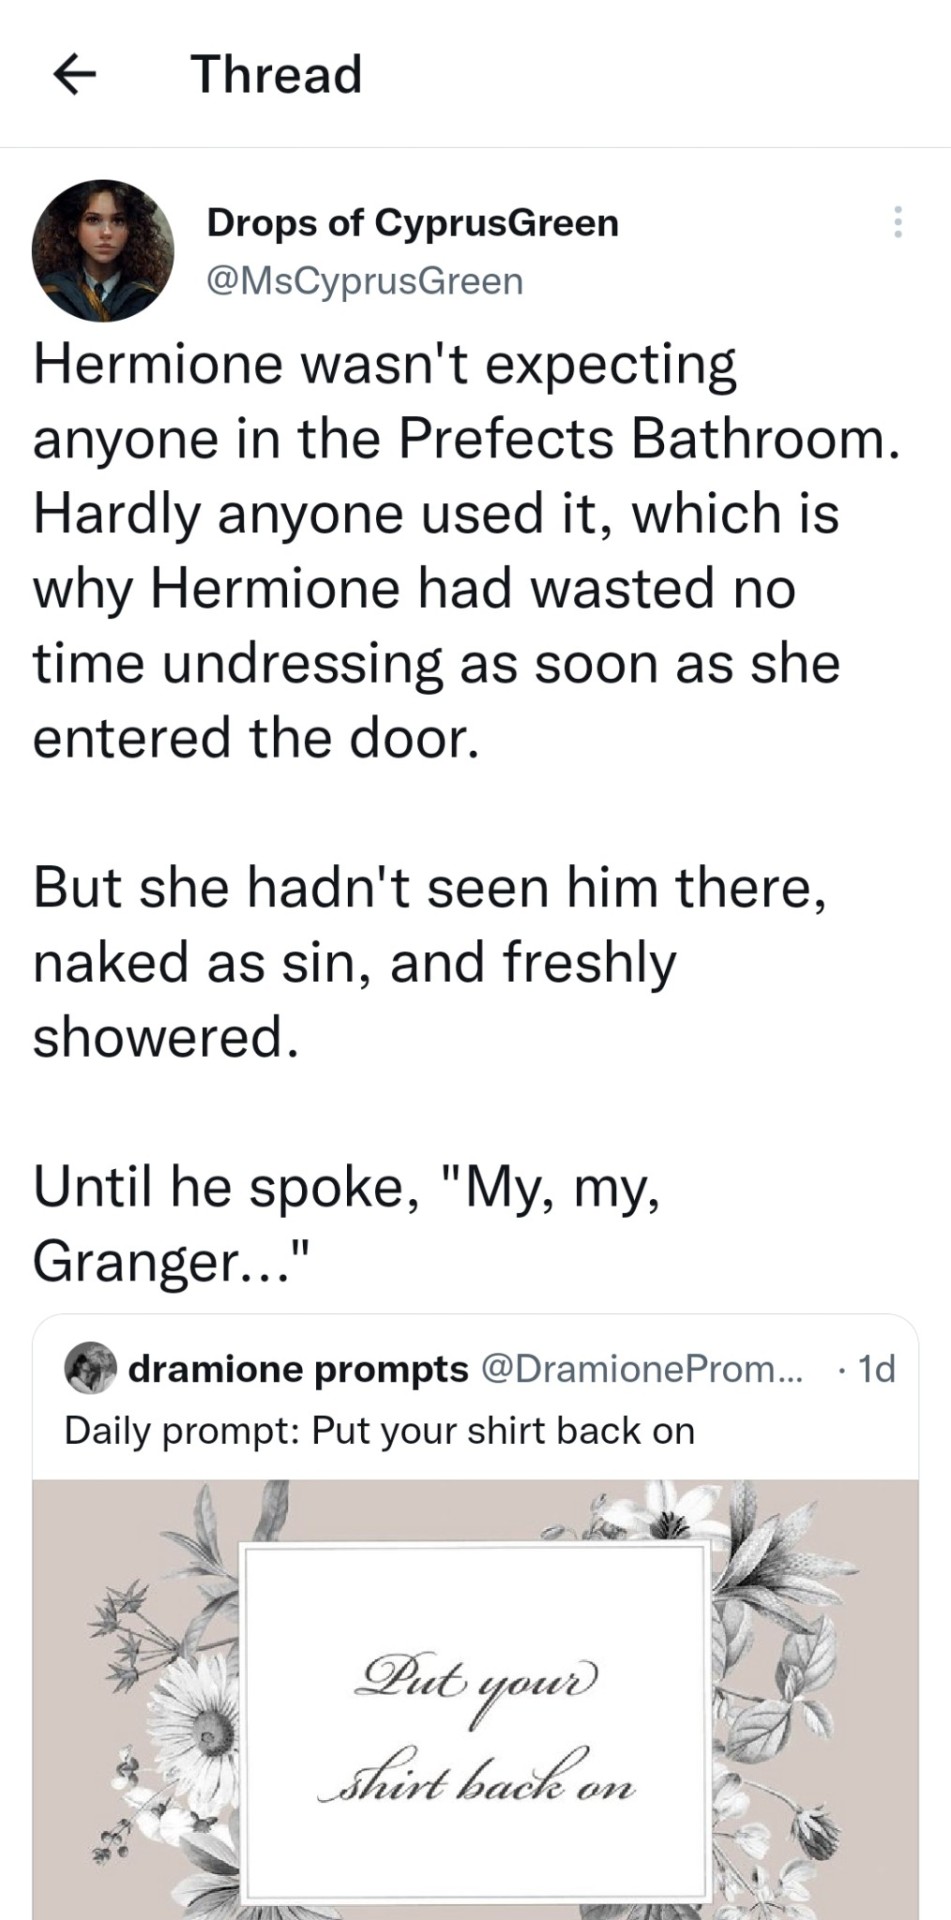 dramione prompts on X: Bonus prompt: What does 'NSFW' mean?   / X